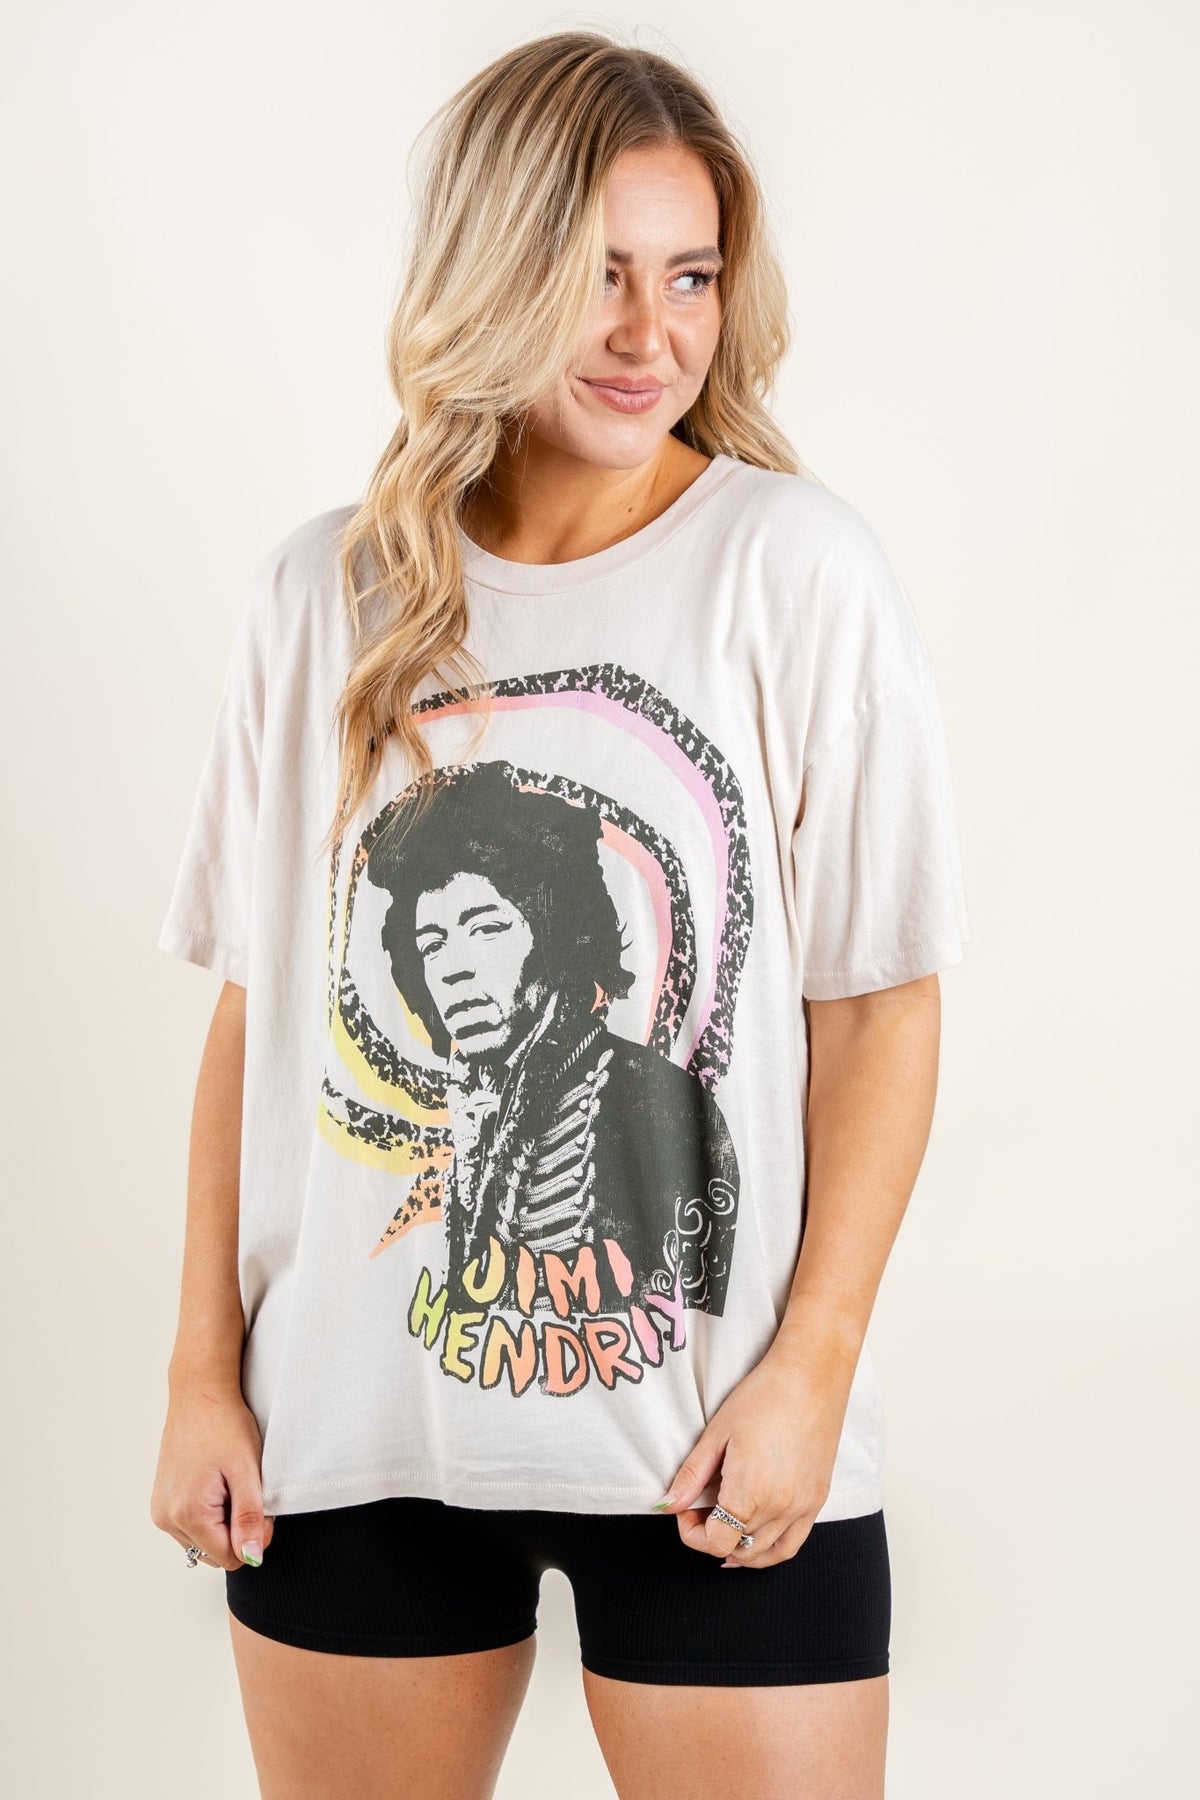 DayDreamer Jimi Hendrix spiral t-shirt dirty white - DayDreamer Graphic Band Tees at Lush Fashion Lounge Trendy Boutique in Oklahoma City